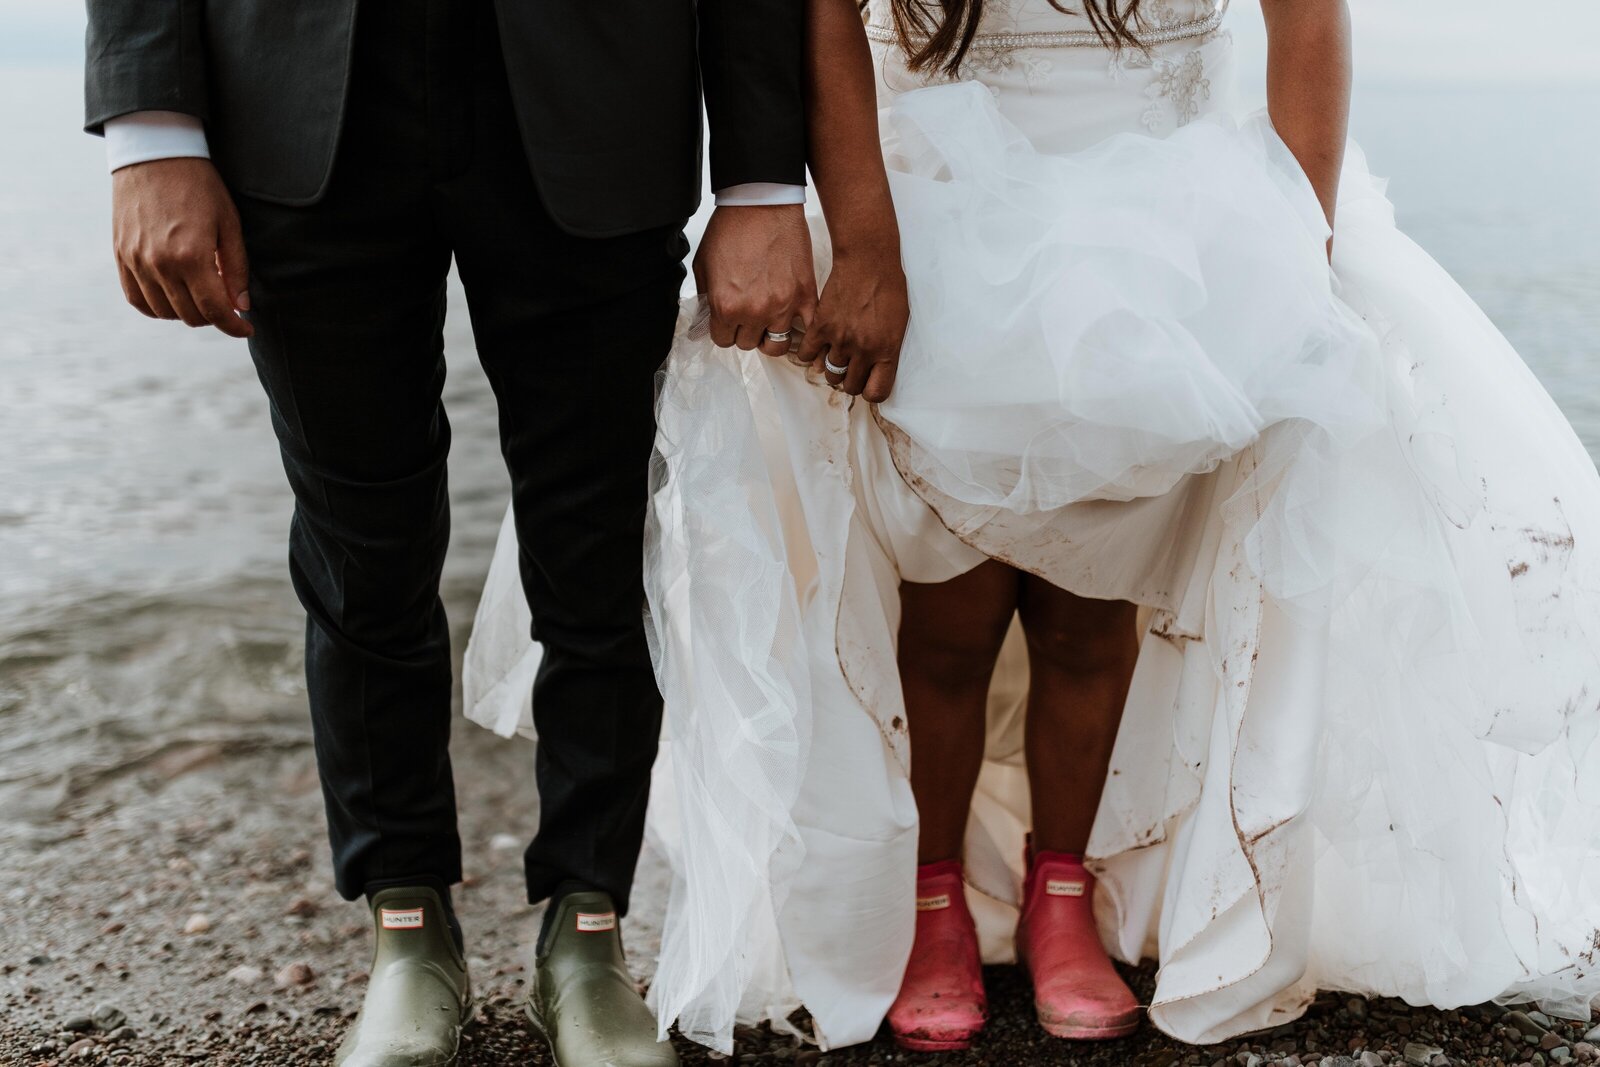 Newlywed couple showing their rubber boots and messy wedding clothes